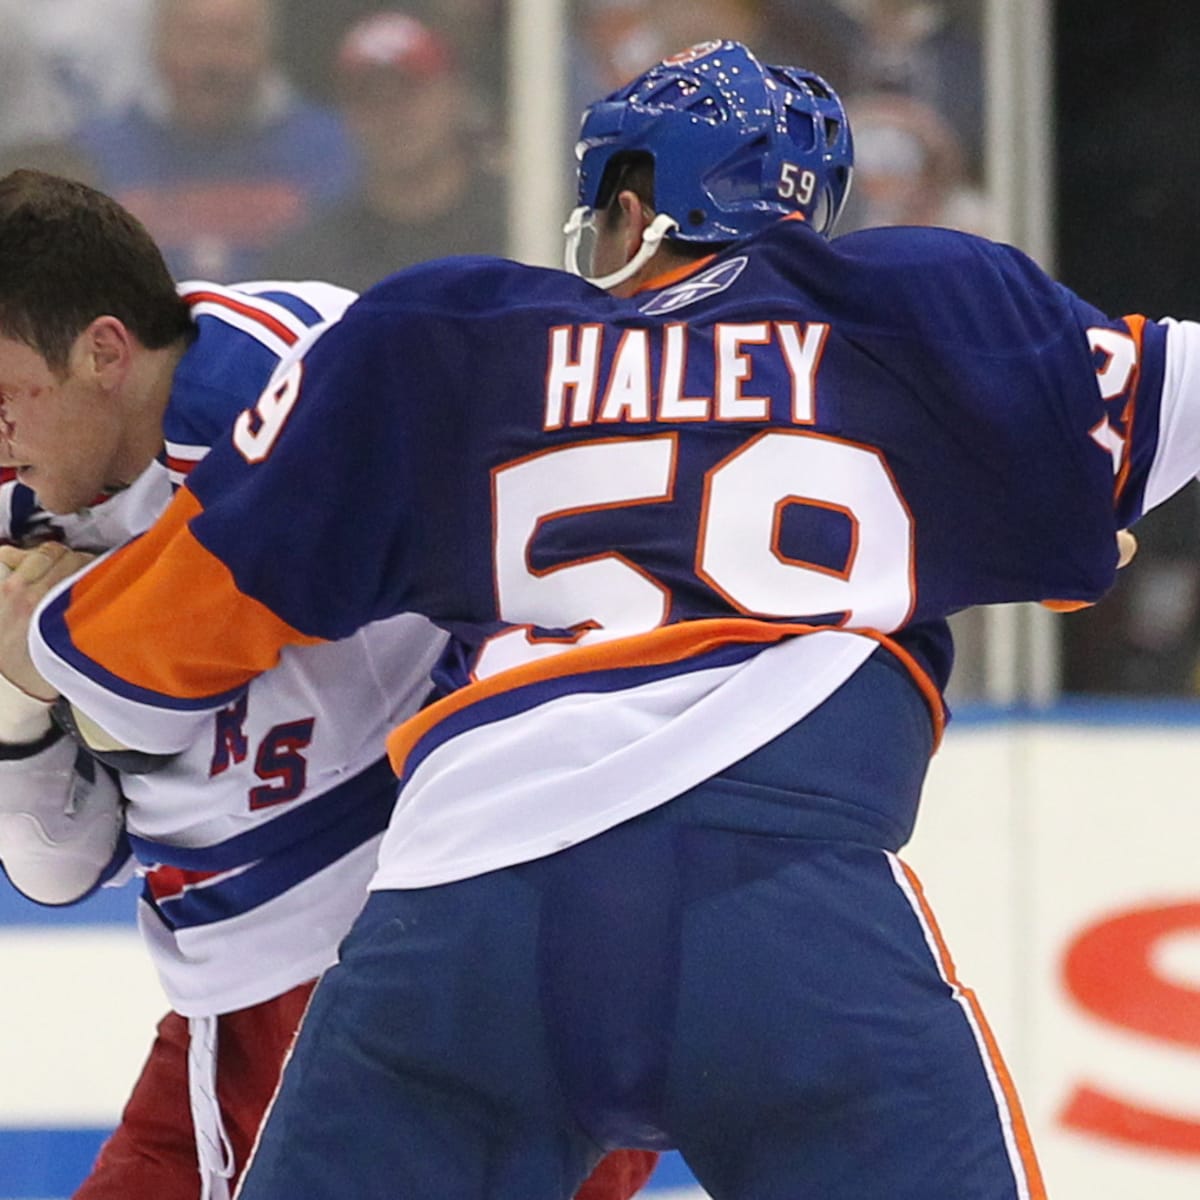 The connection between the NY Islanders and the popularity of the